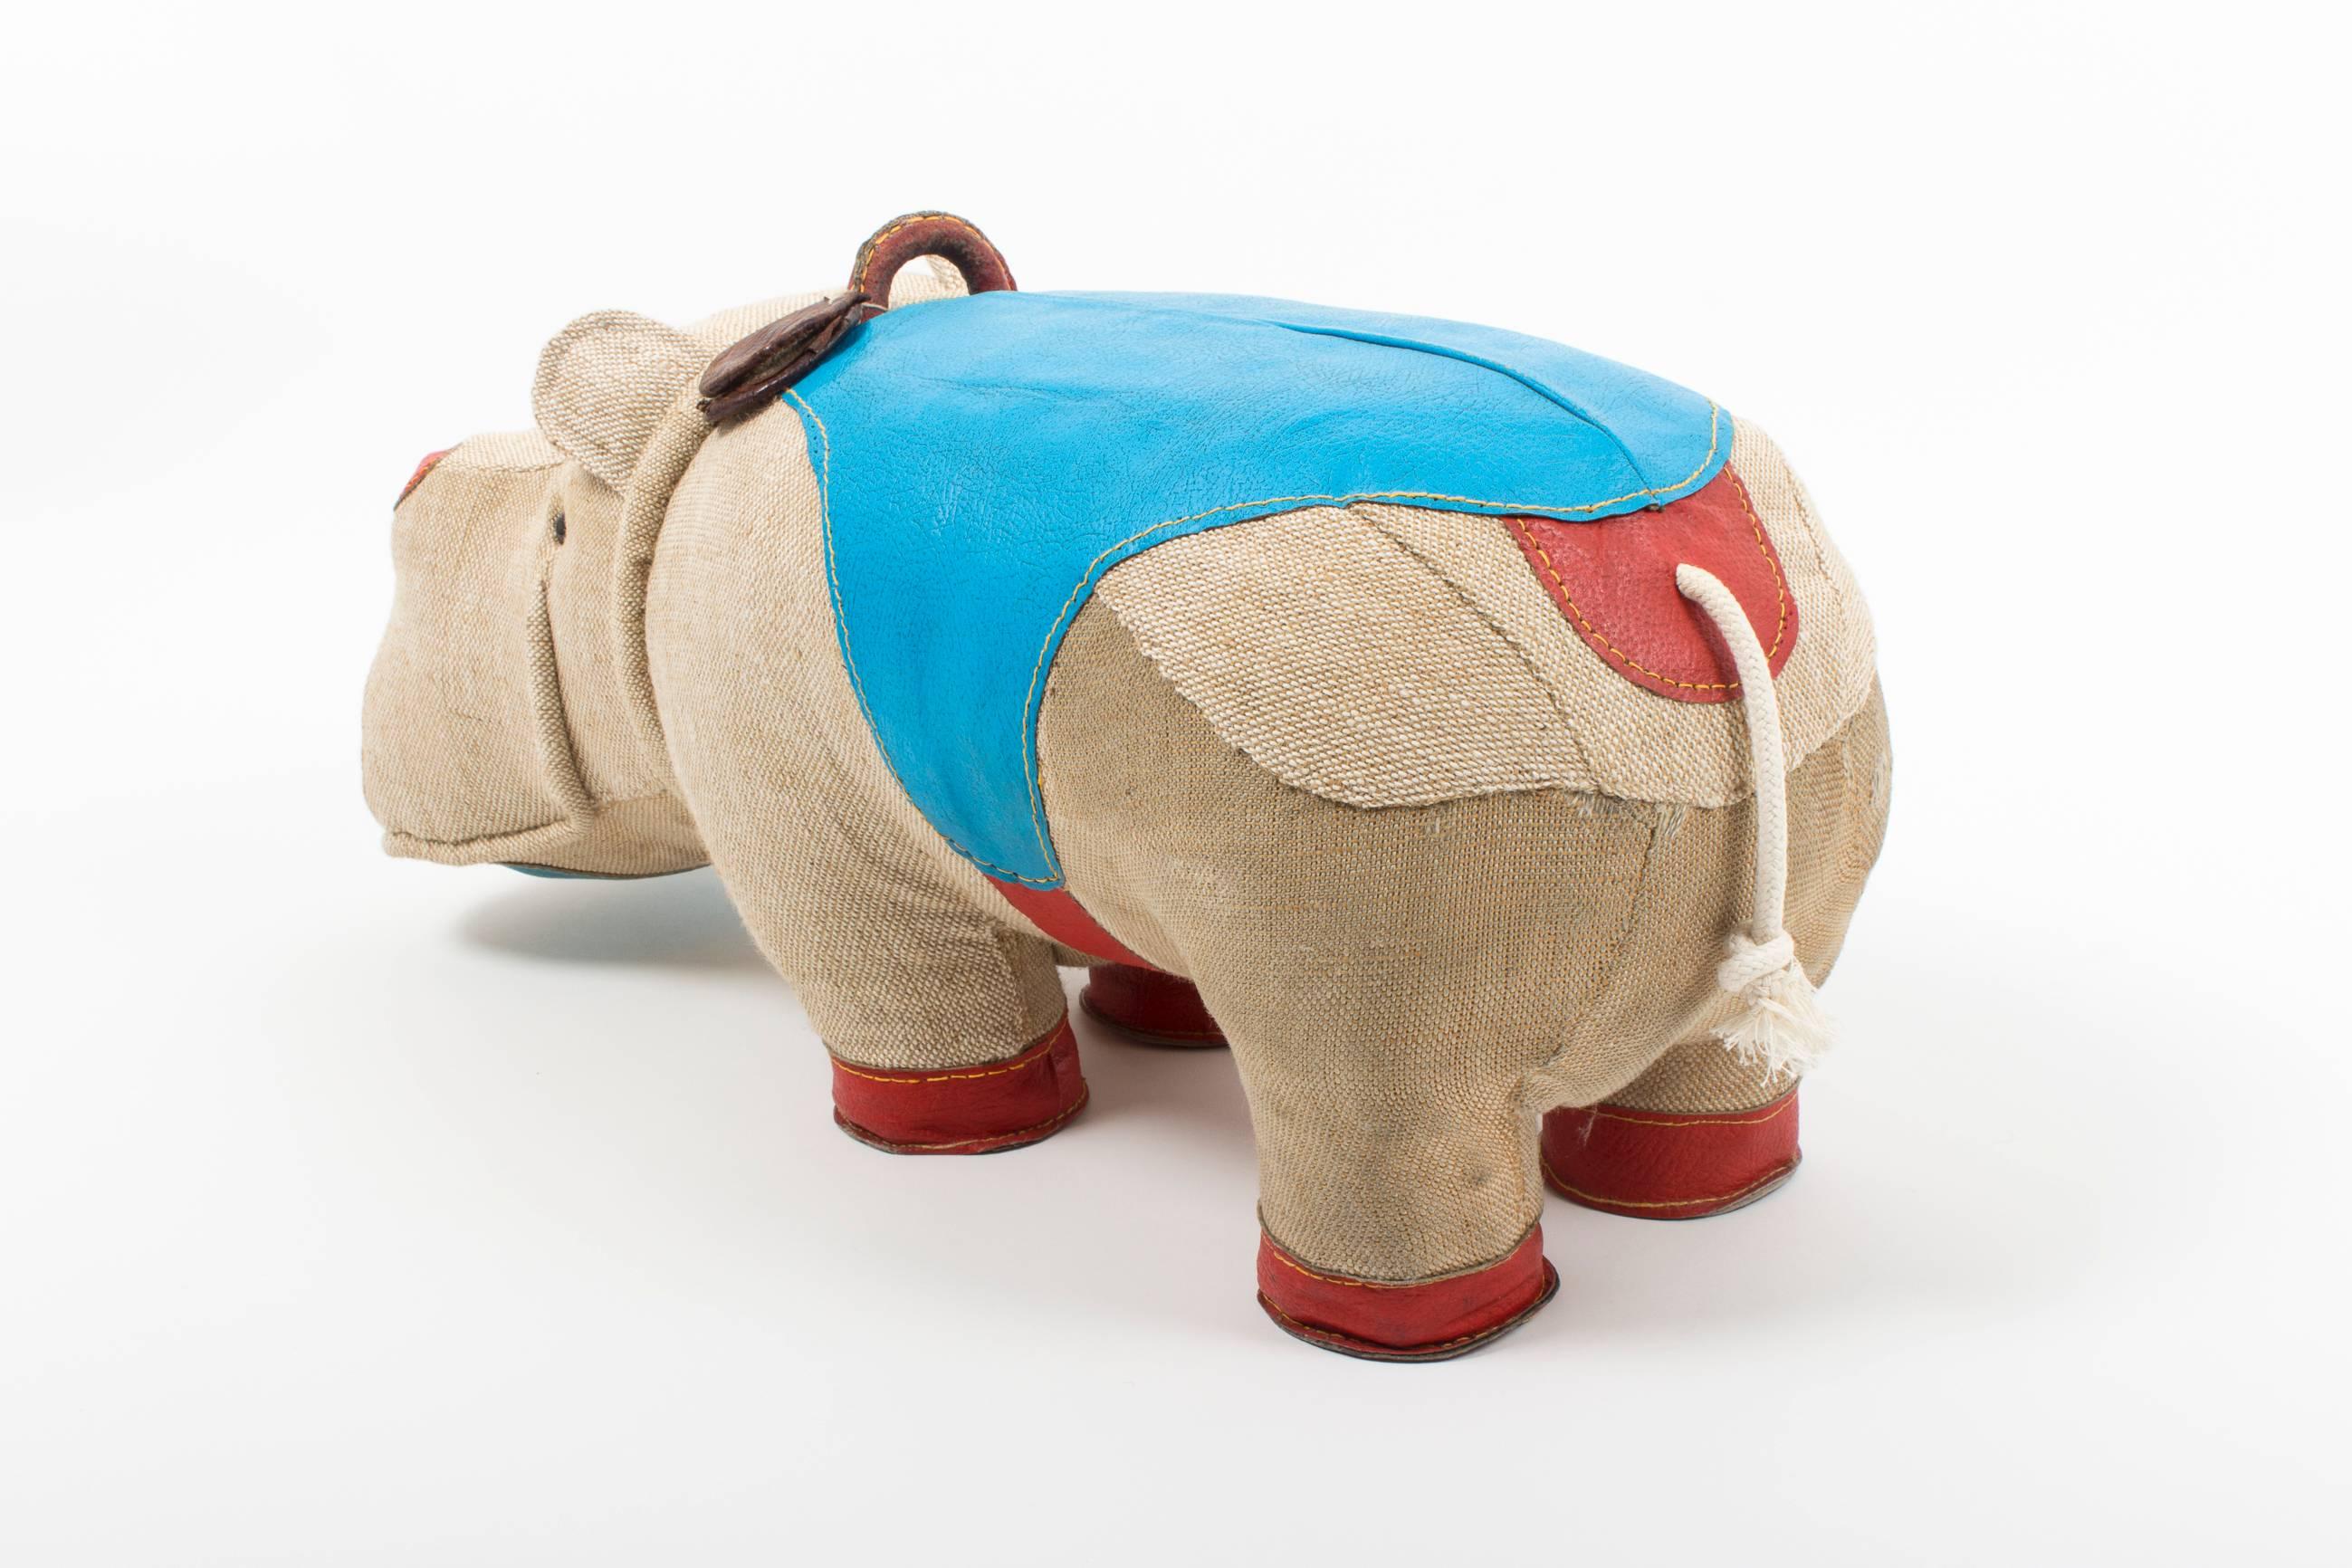 Leather Signed 'Therapeutic Toy' Hippopotamus by Renate Müller, Designed in 1968